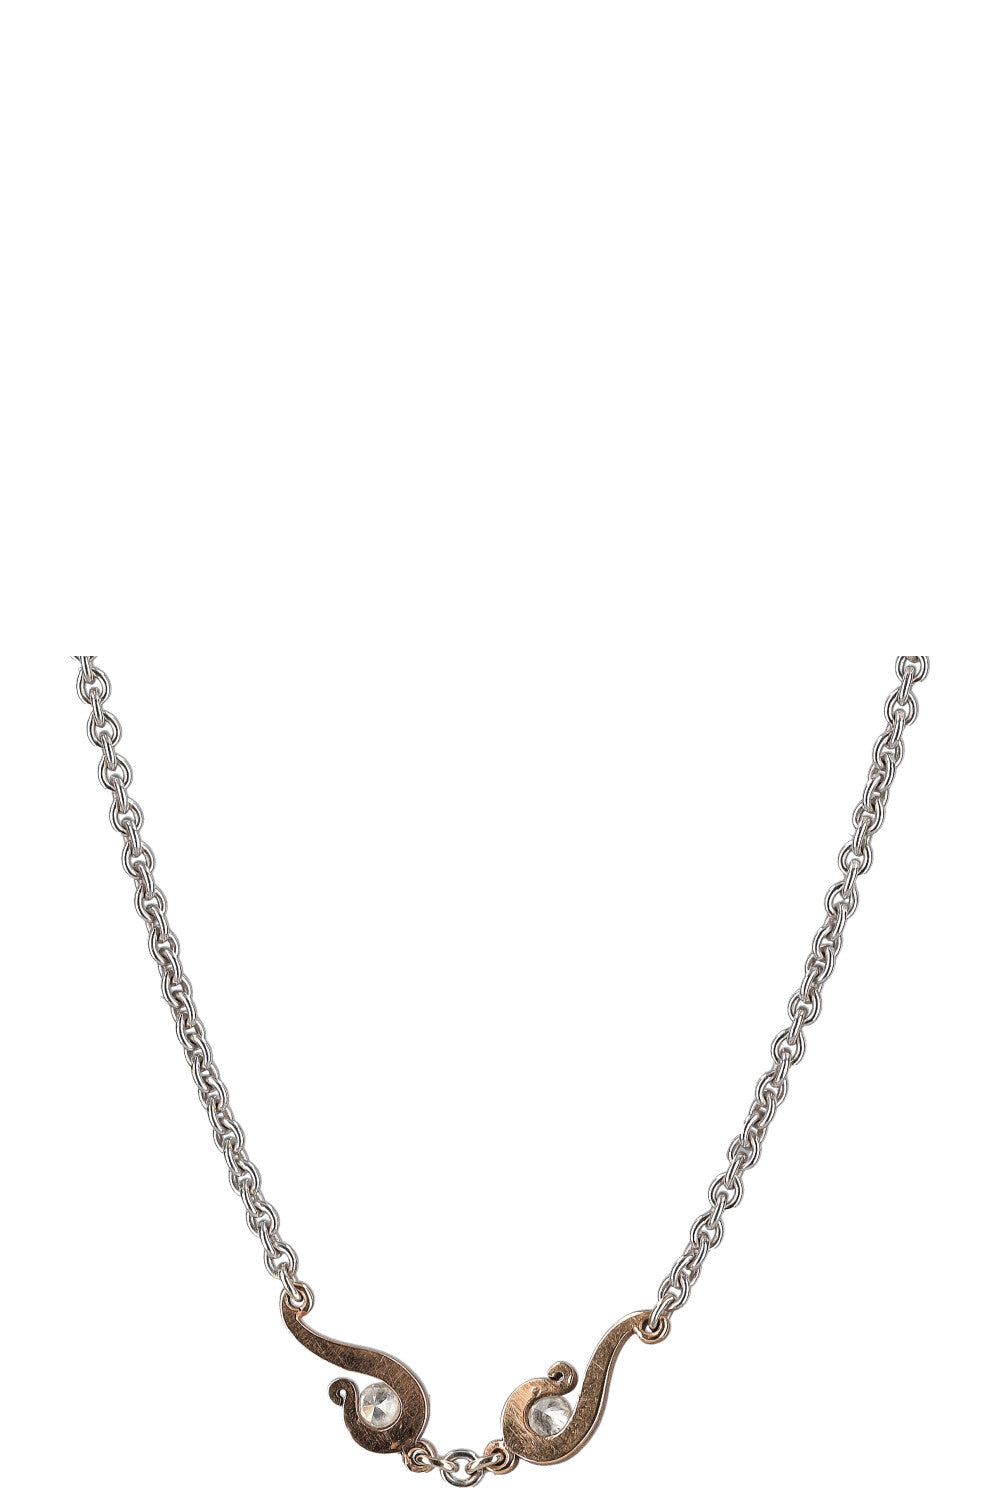 SCHNIDER&HAMMER Necklace Diamonds White and Rose Gold